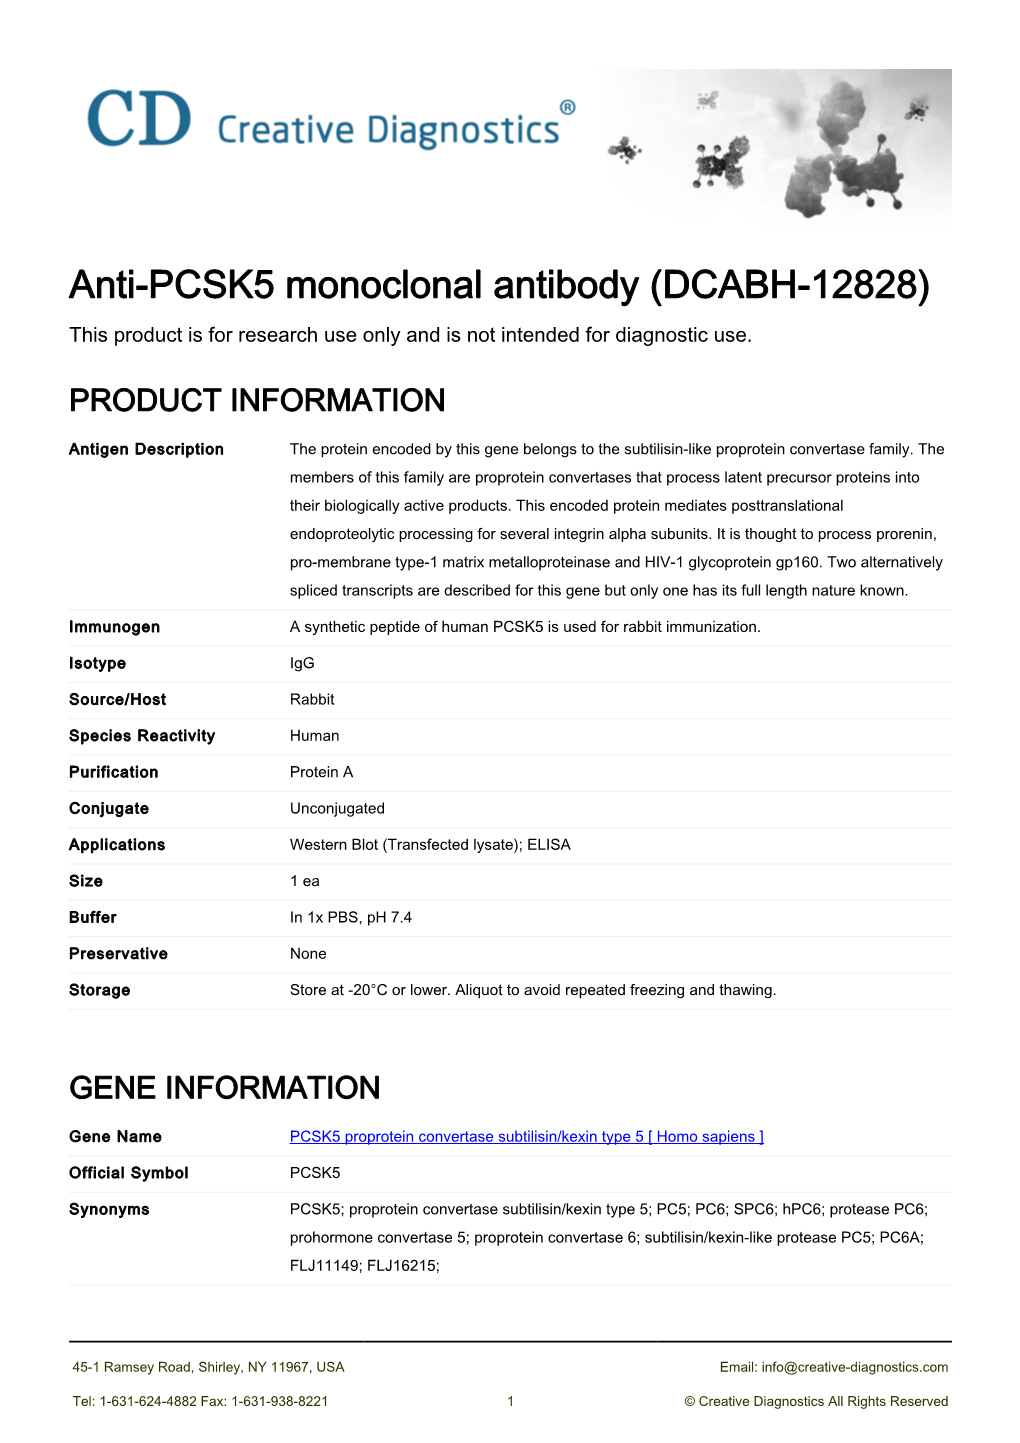 Anti-PCSK5 Monoclonal Antibody (DCABH-12828) This Product Is for Research Use Only and Is Not Intended for Diagnostic Use